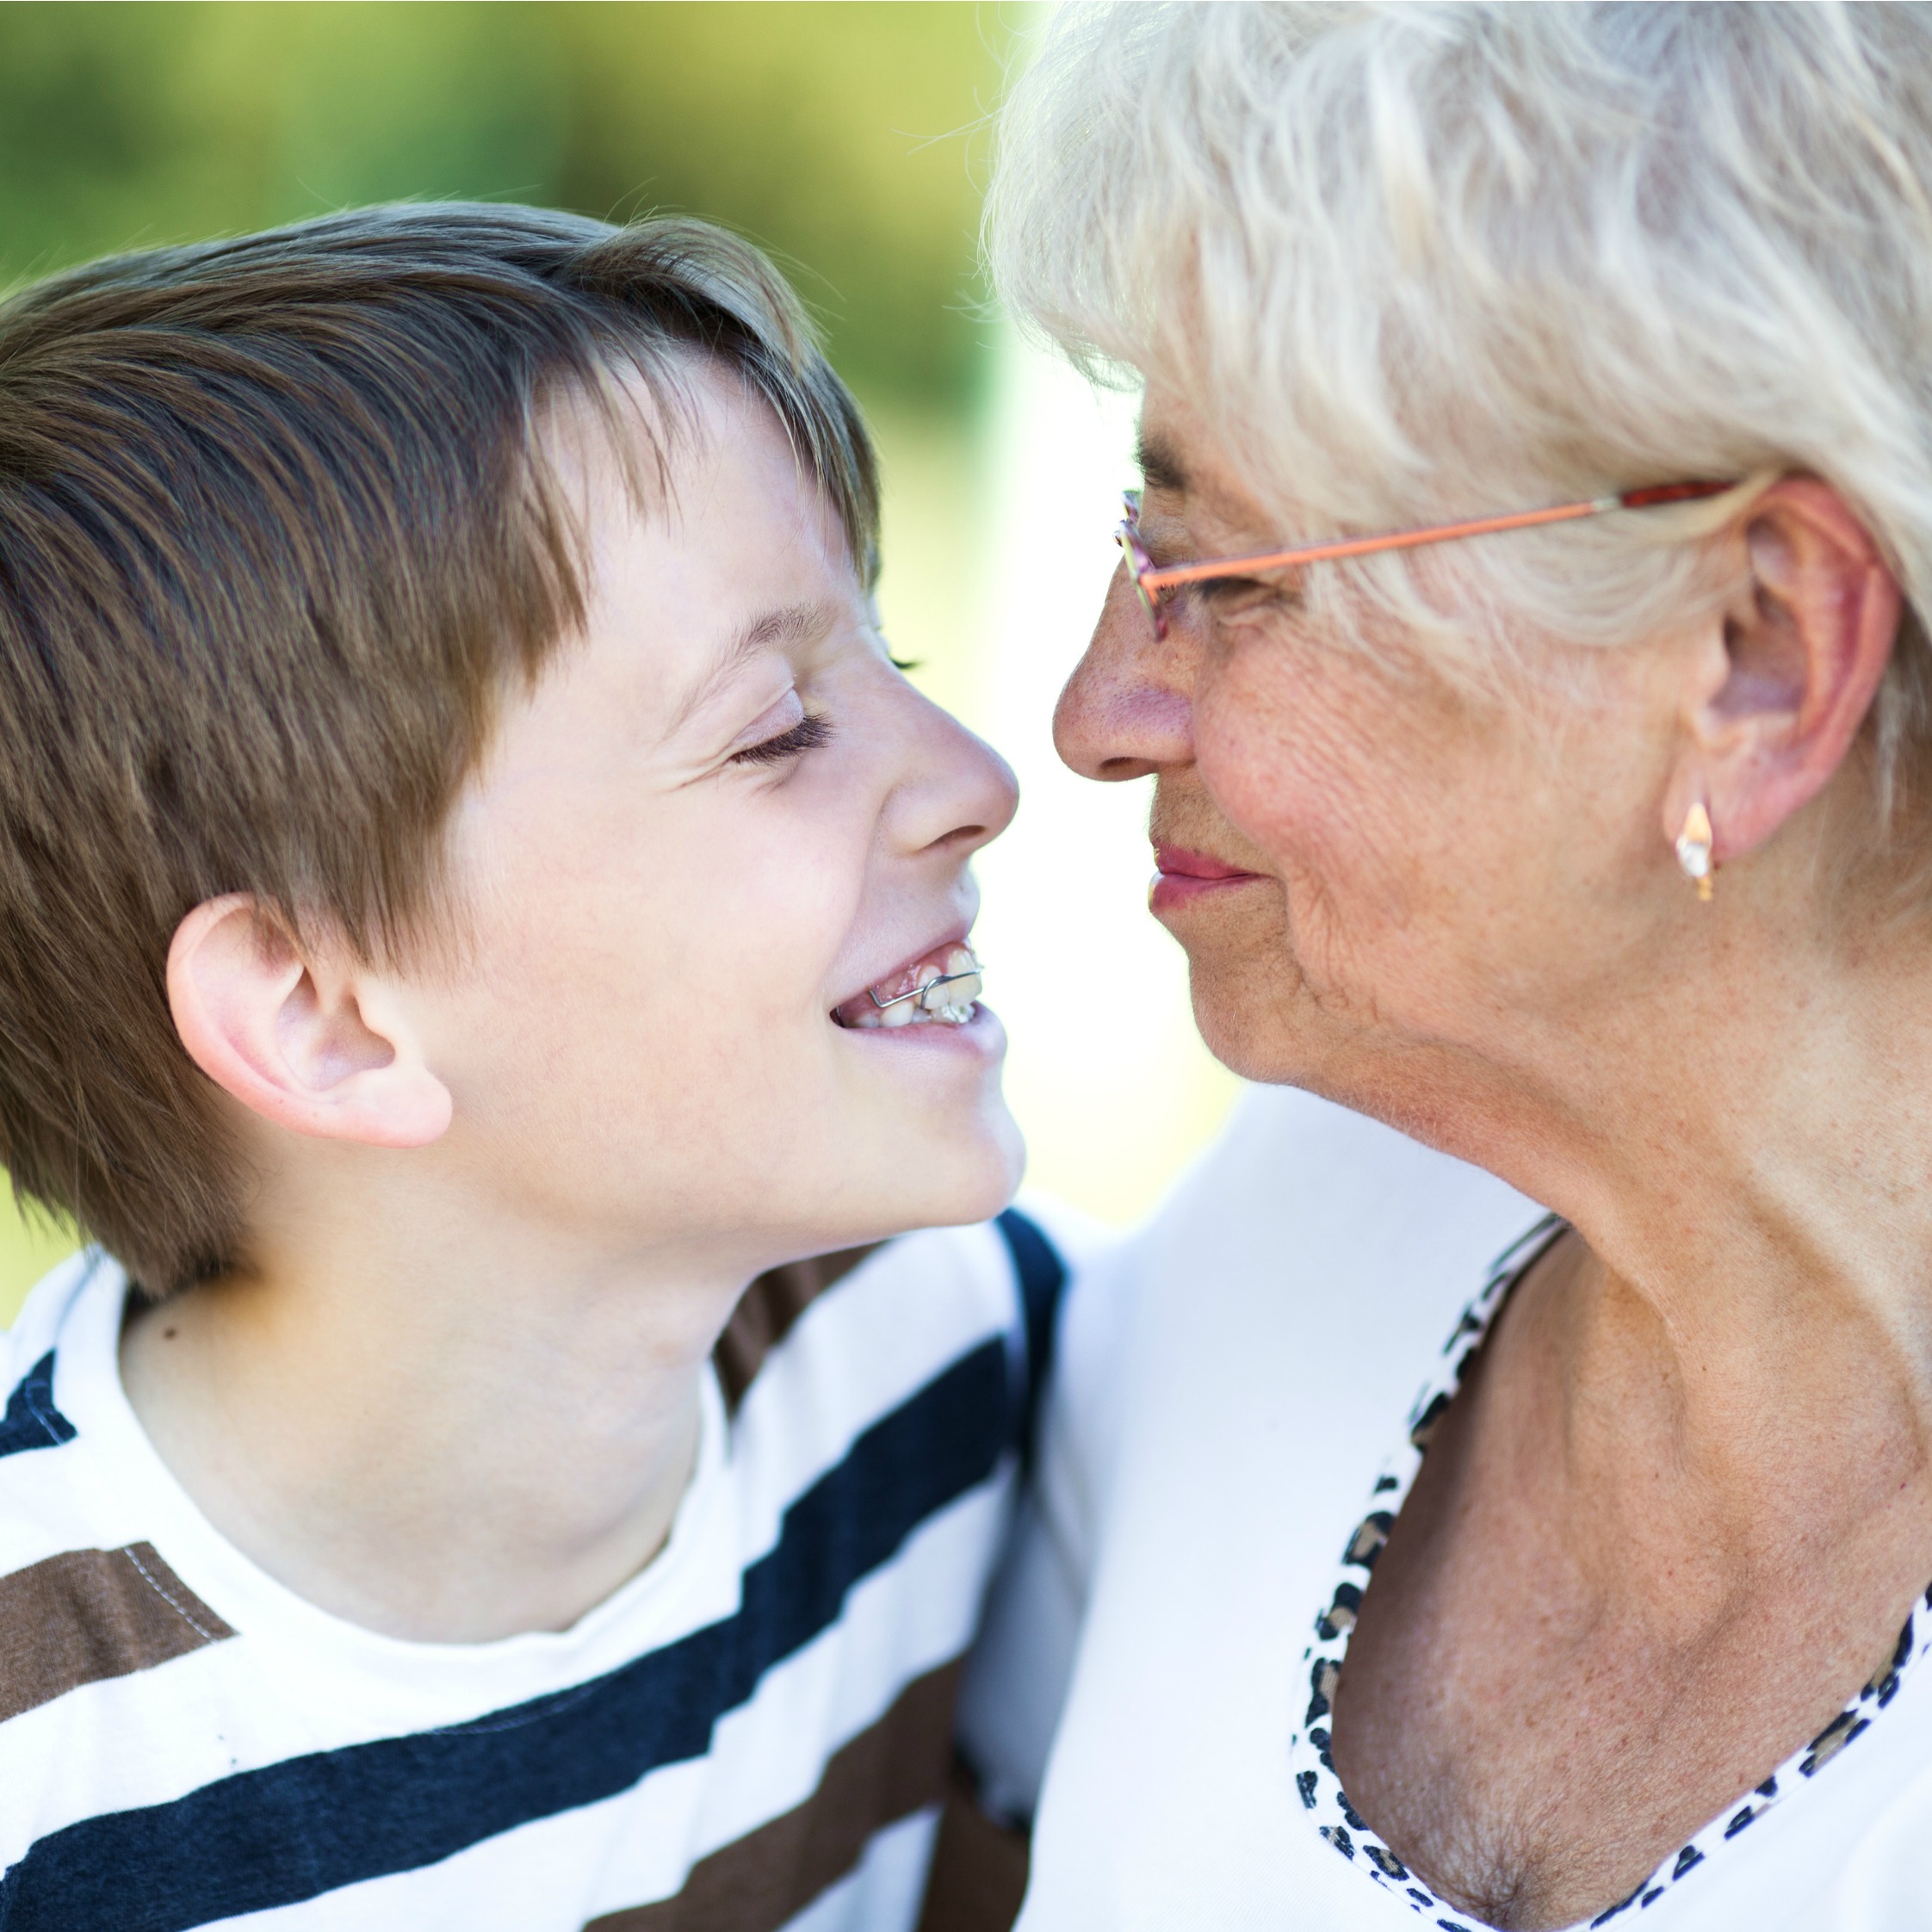 7 Meaningful Ways to Connect with Faraway Grandparents